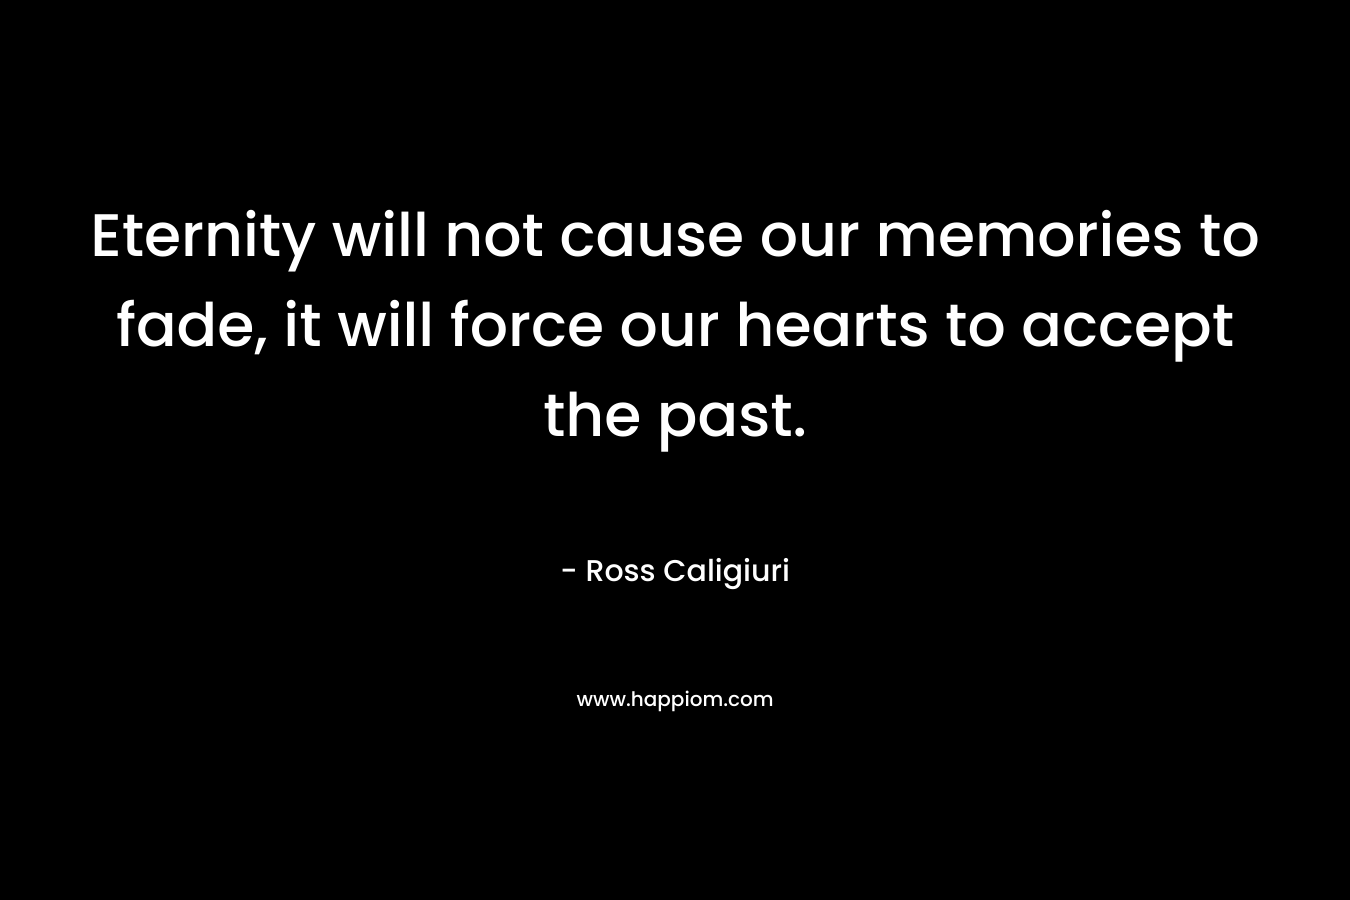 Eternity will not cause our memories to fade, it will force our hearts to accept the past.